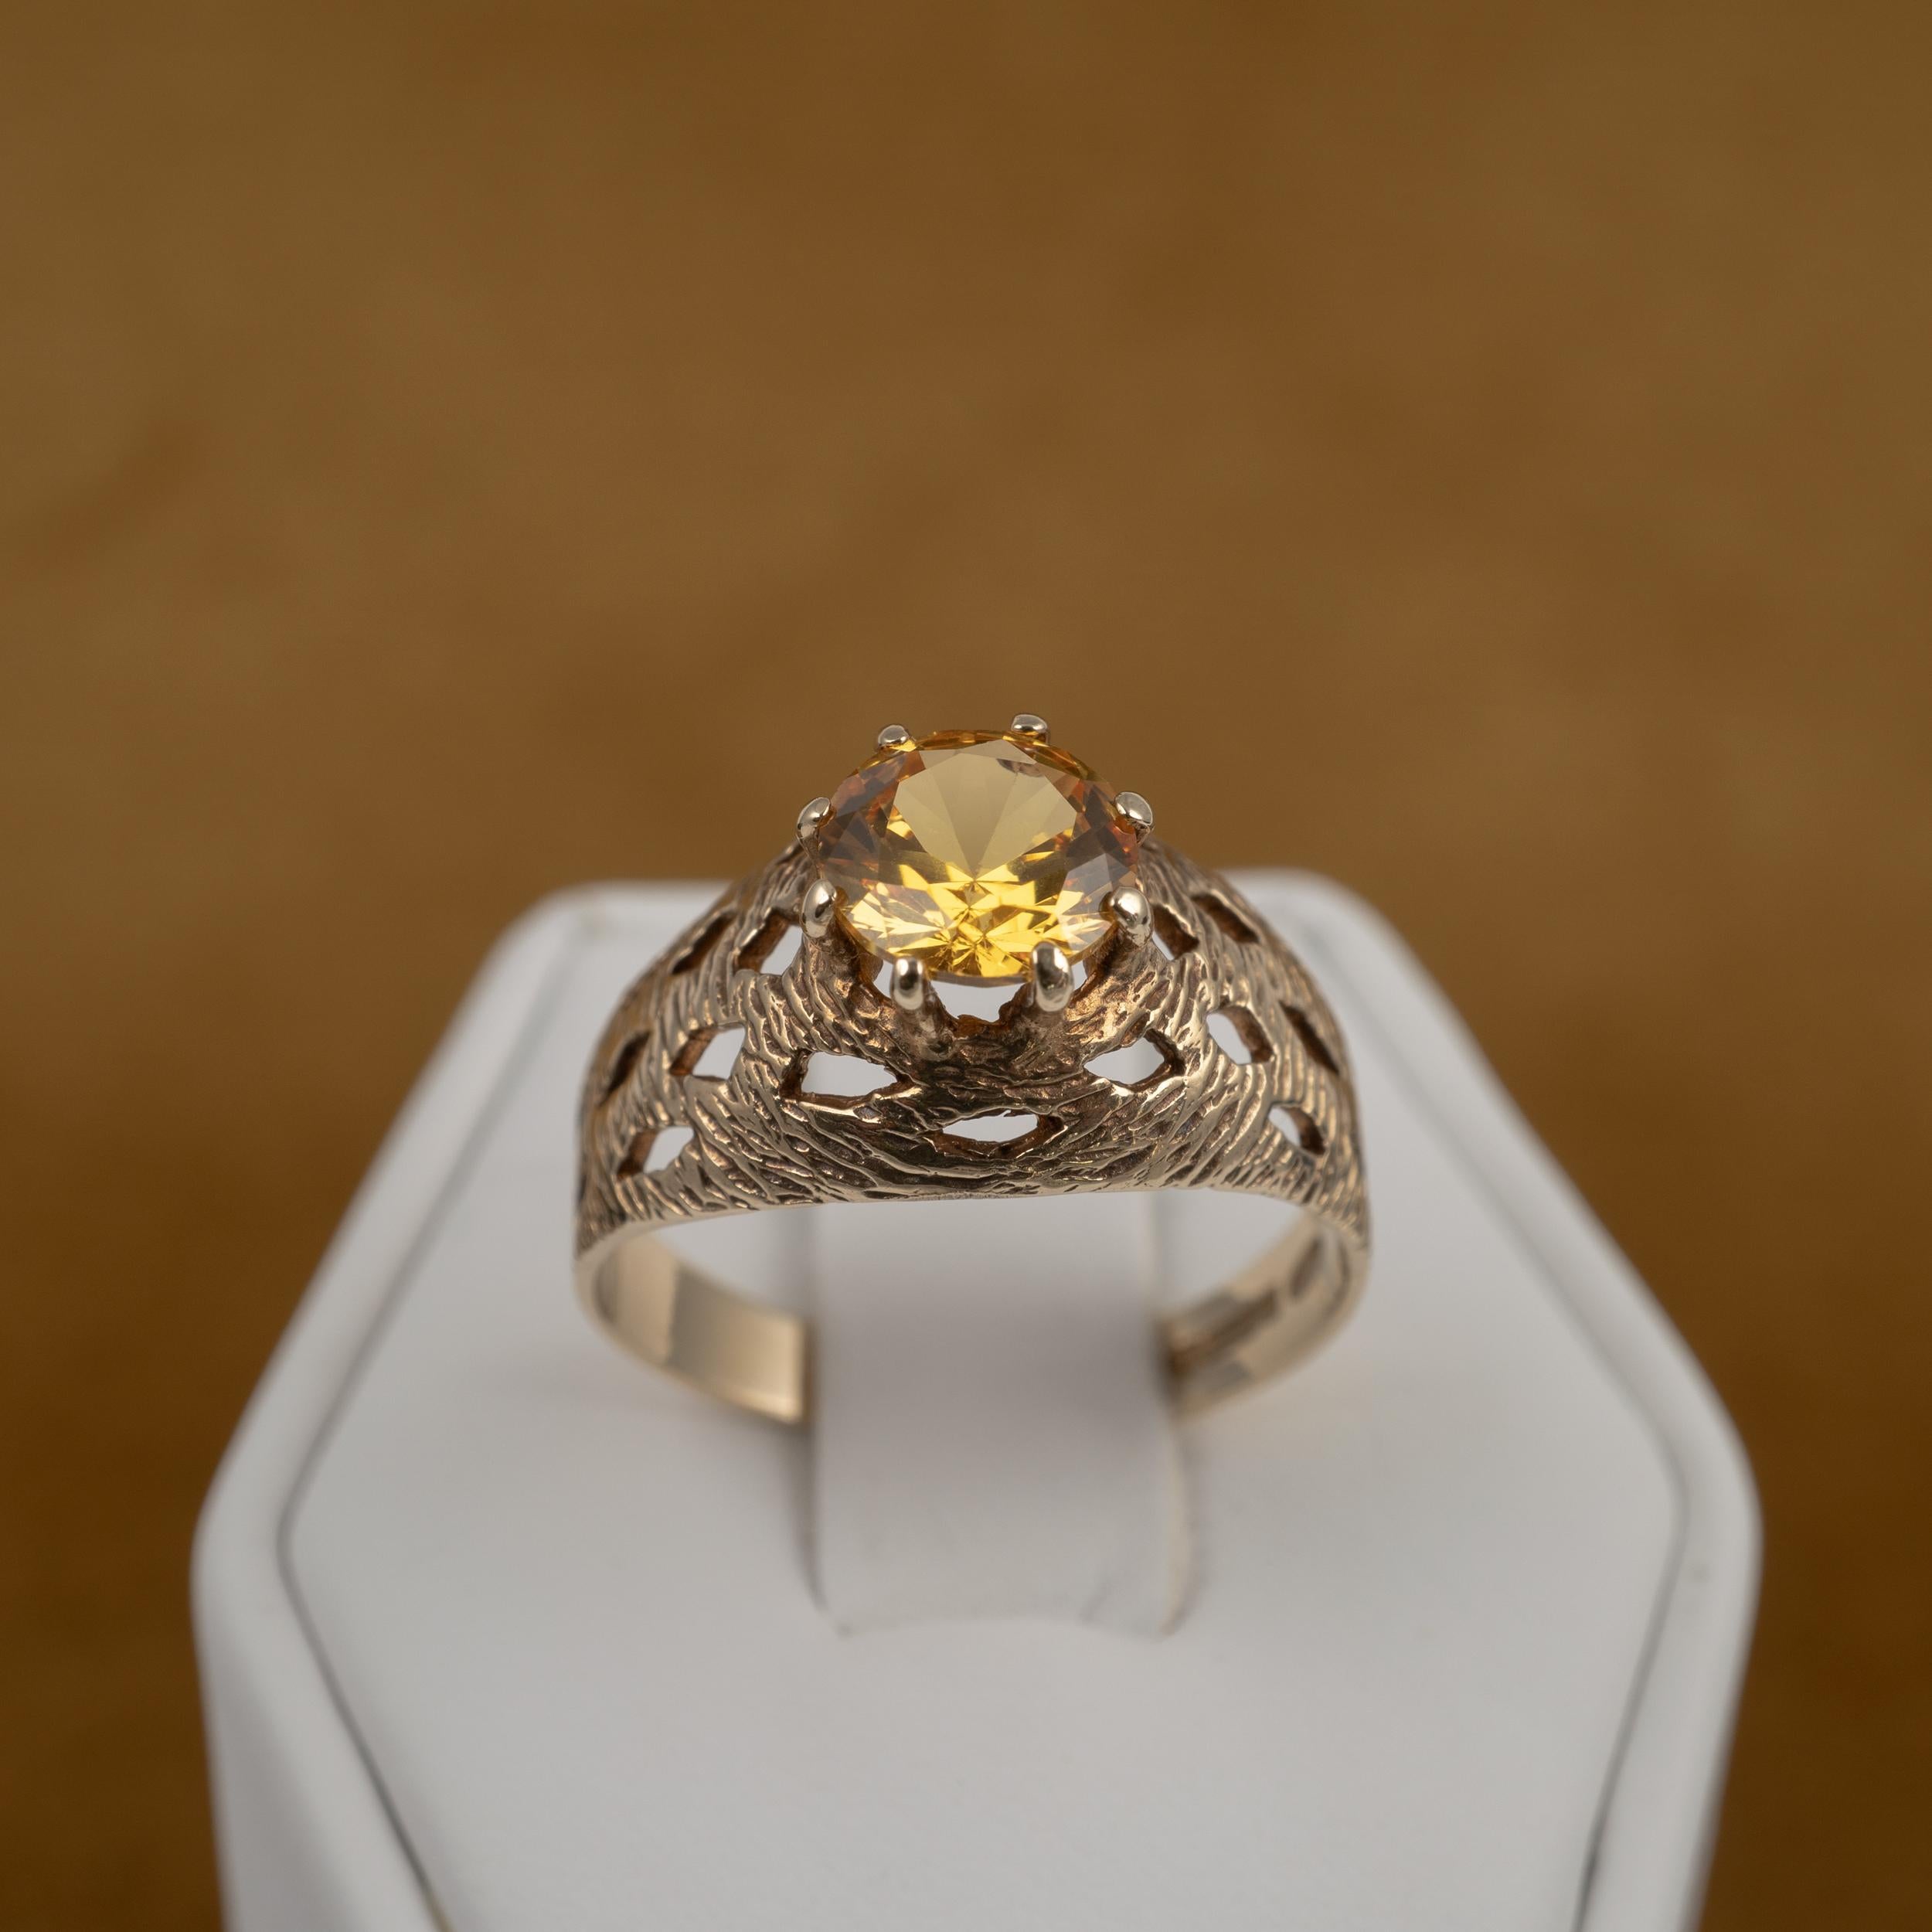 Women's Vintage 19780s Chunky Citrine Solitaire Ring 9 Karat Gold Hallmark Dated 1974 For Sale